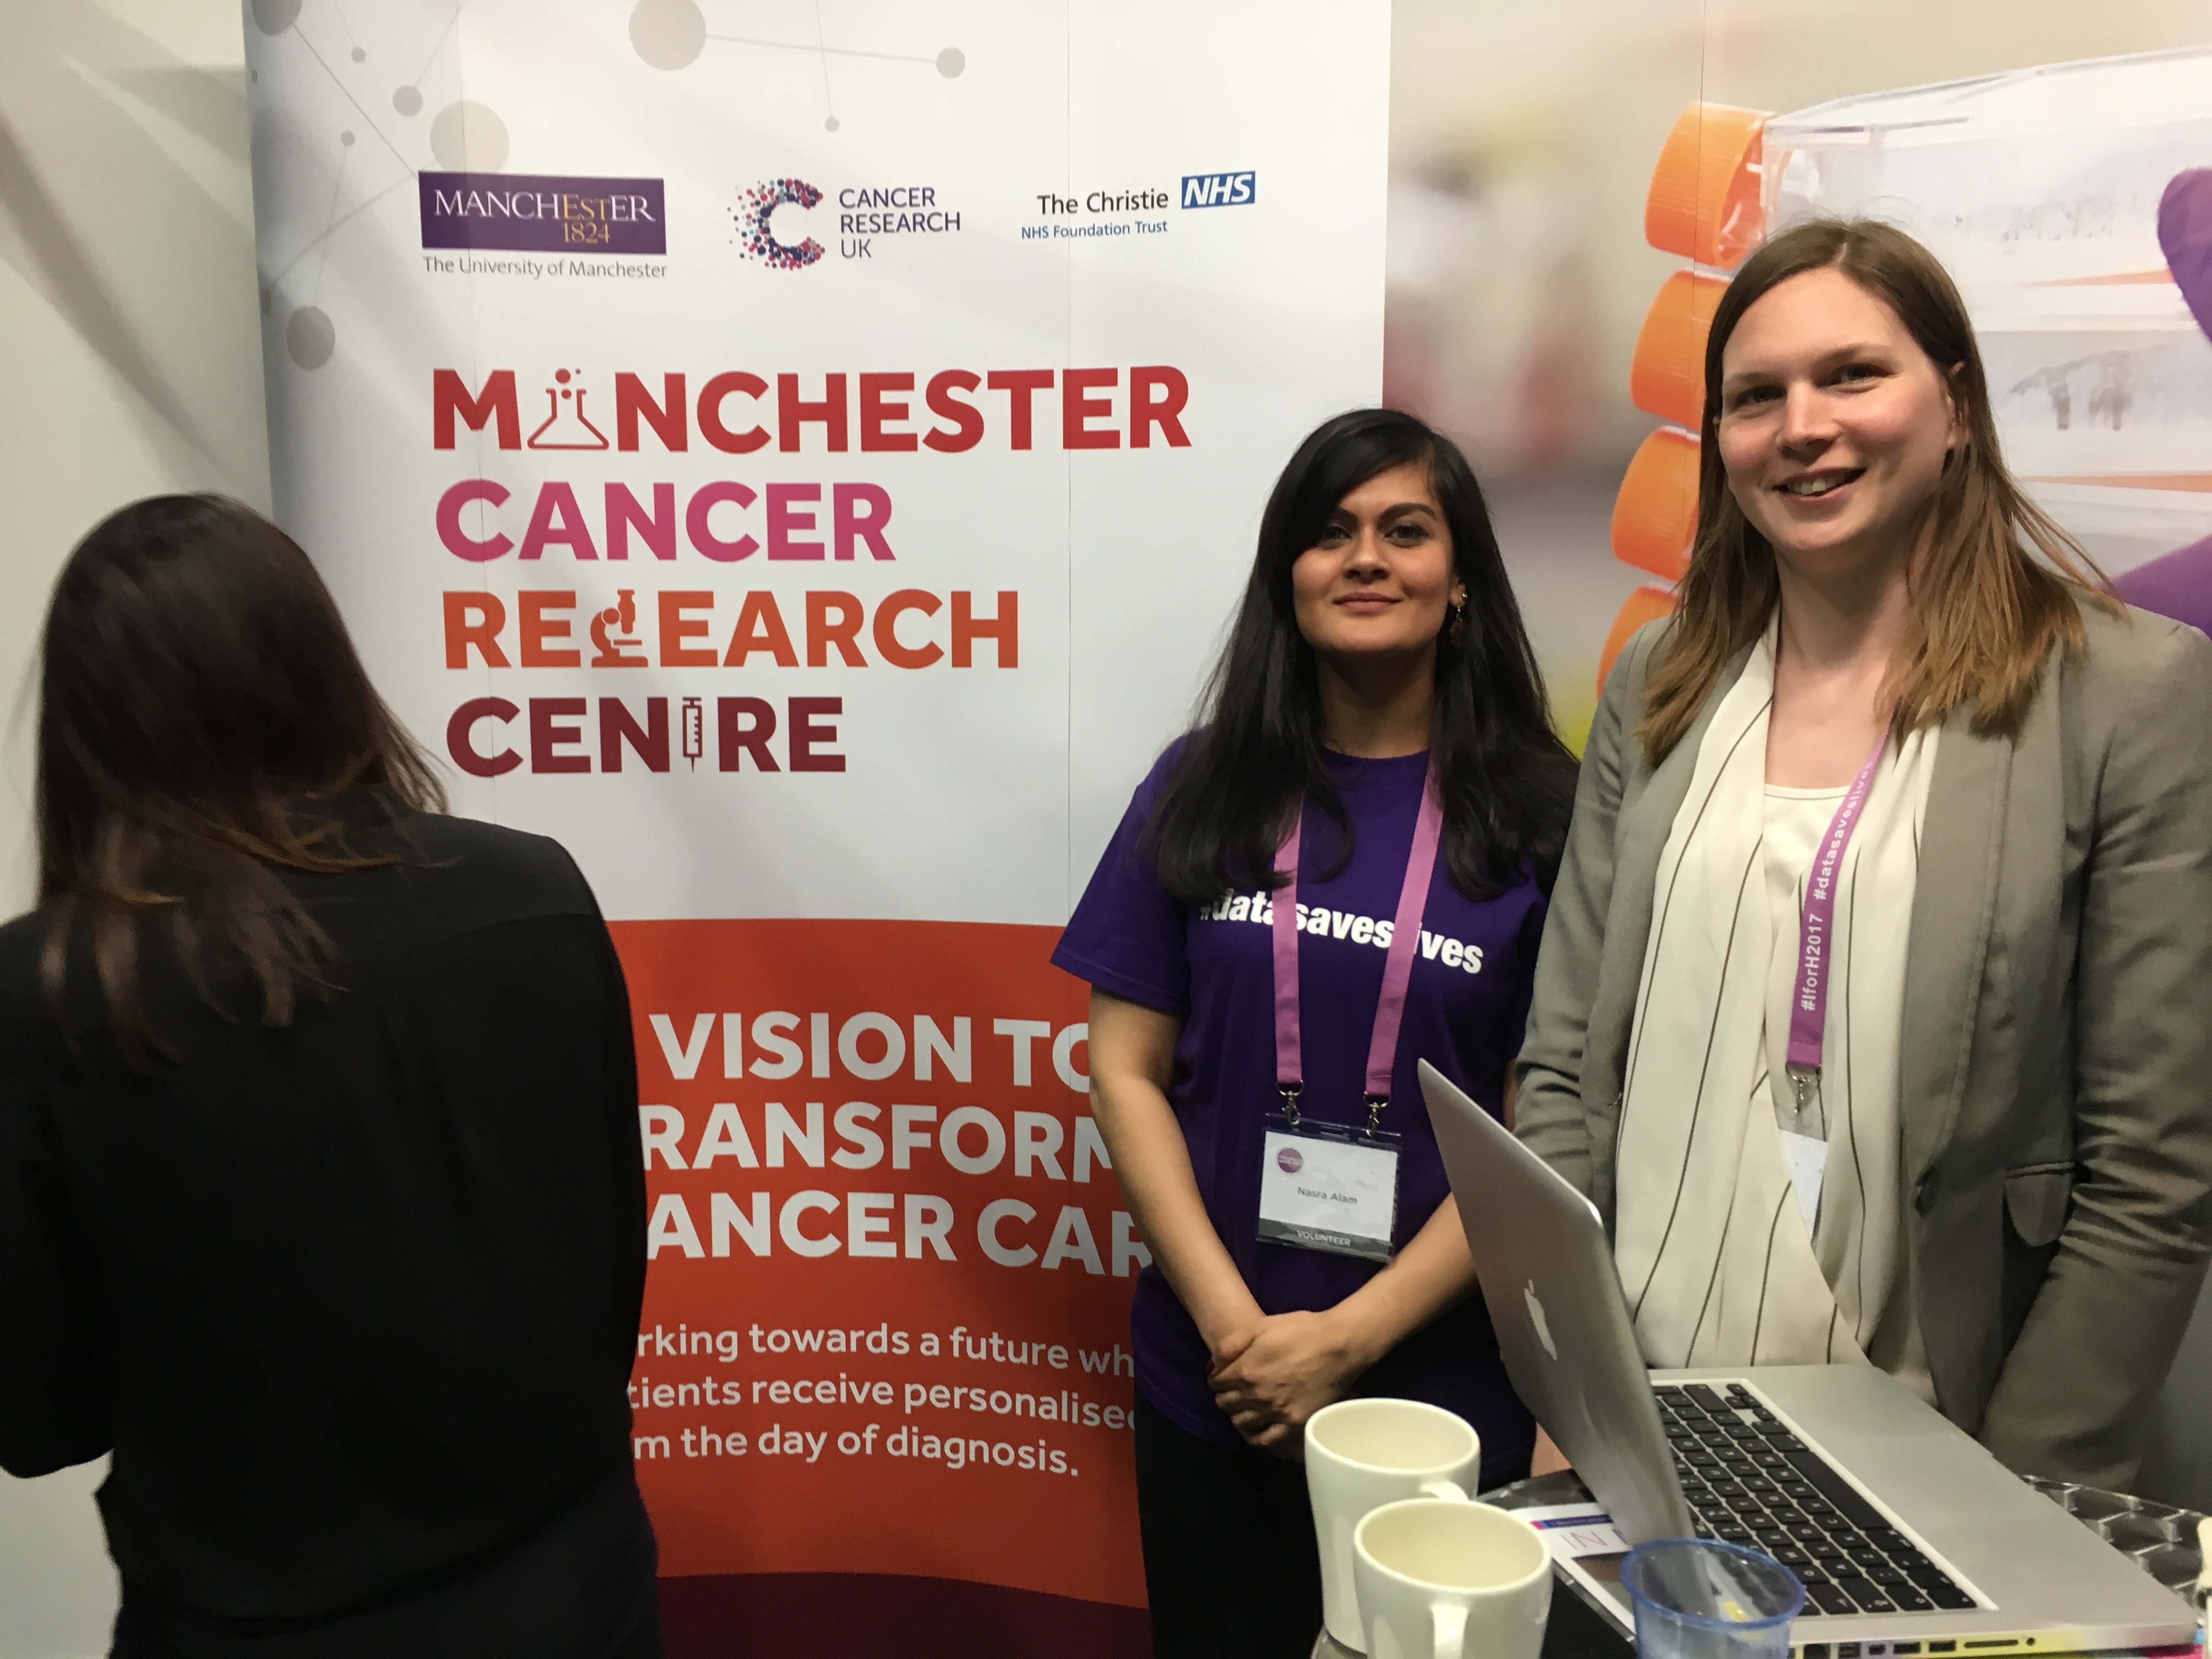 Manchester Cancer Research Centre stand | A Tree of Life Sciences Ltd